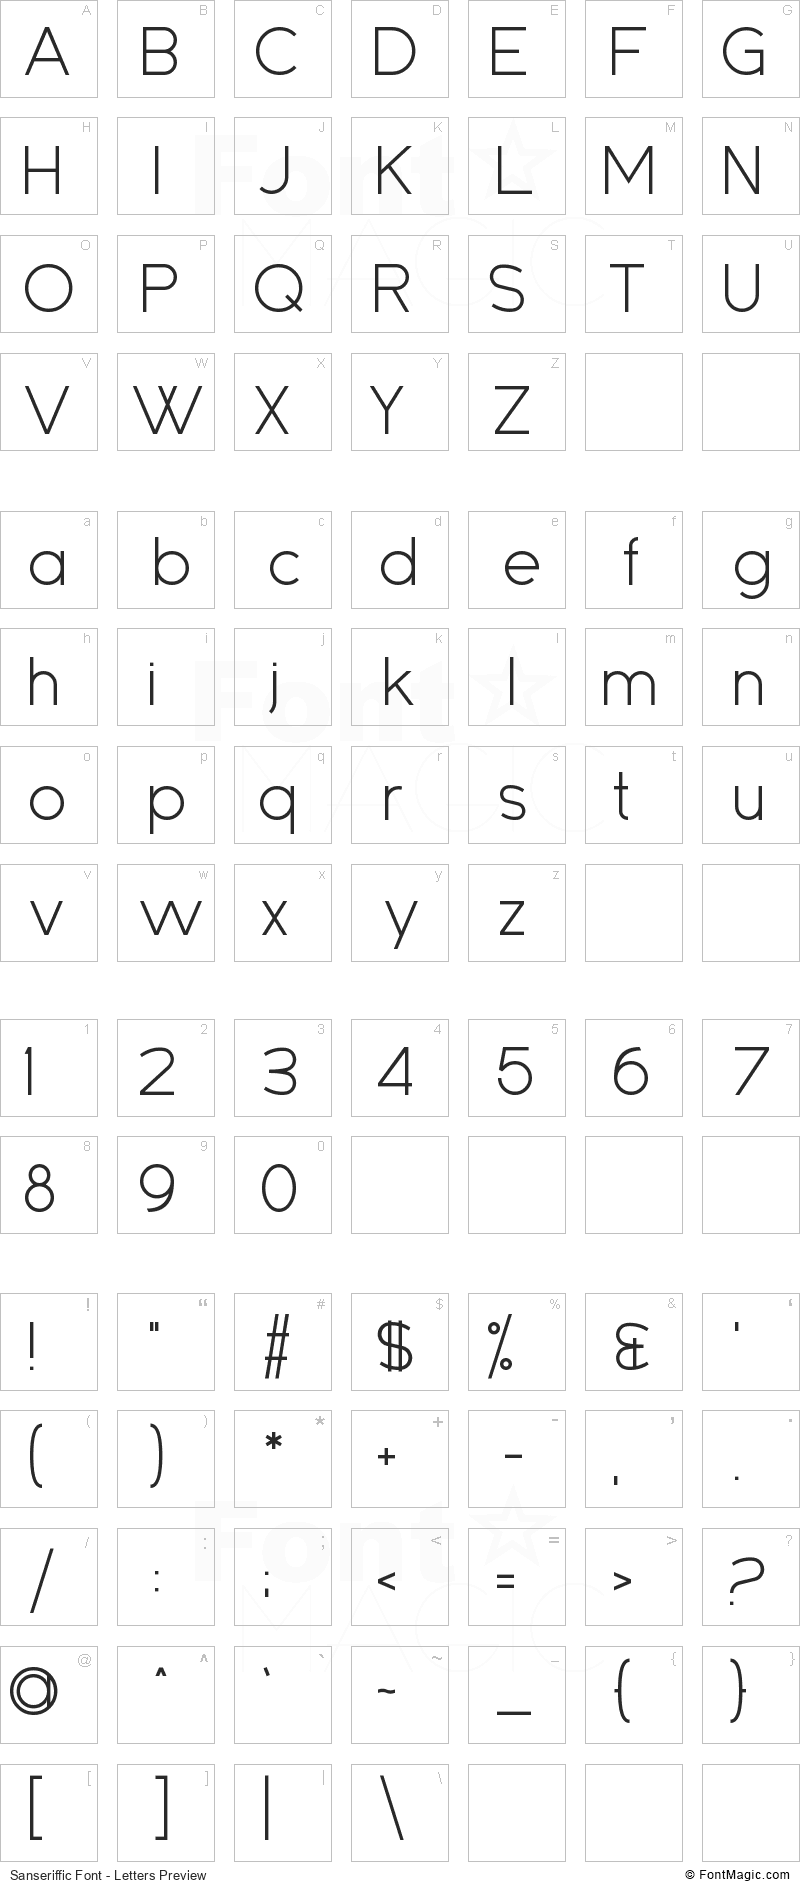 Sanseriffic Font - All Latters Preview Chart